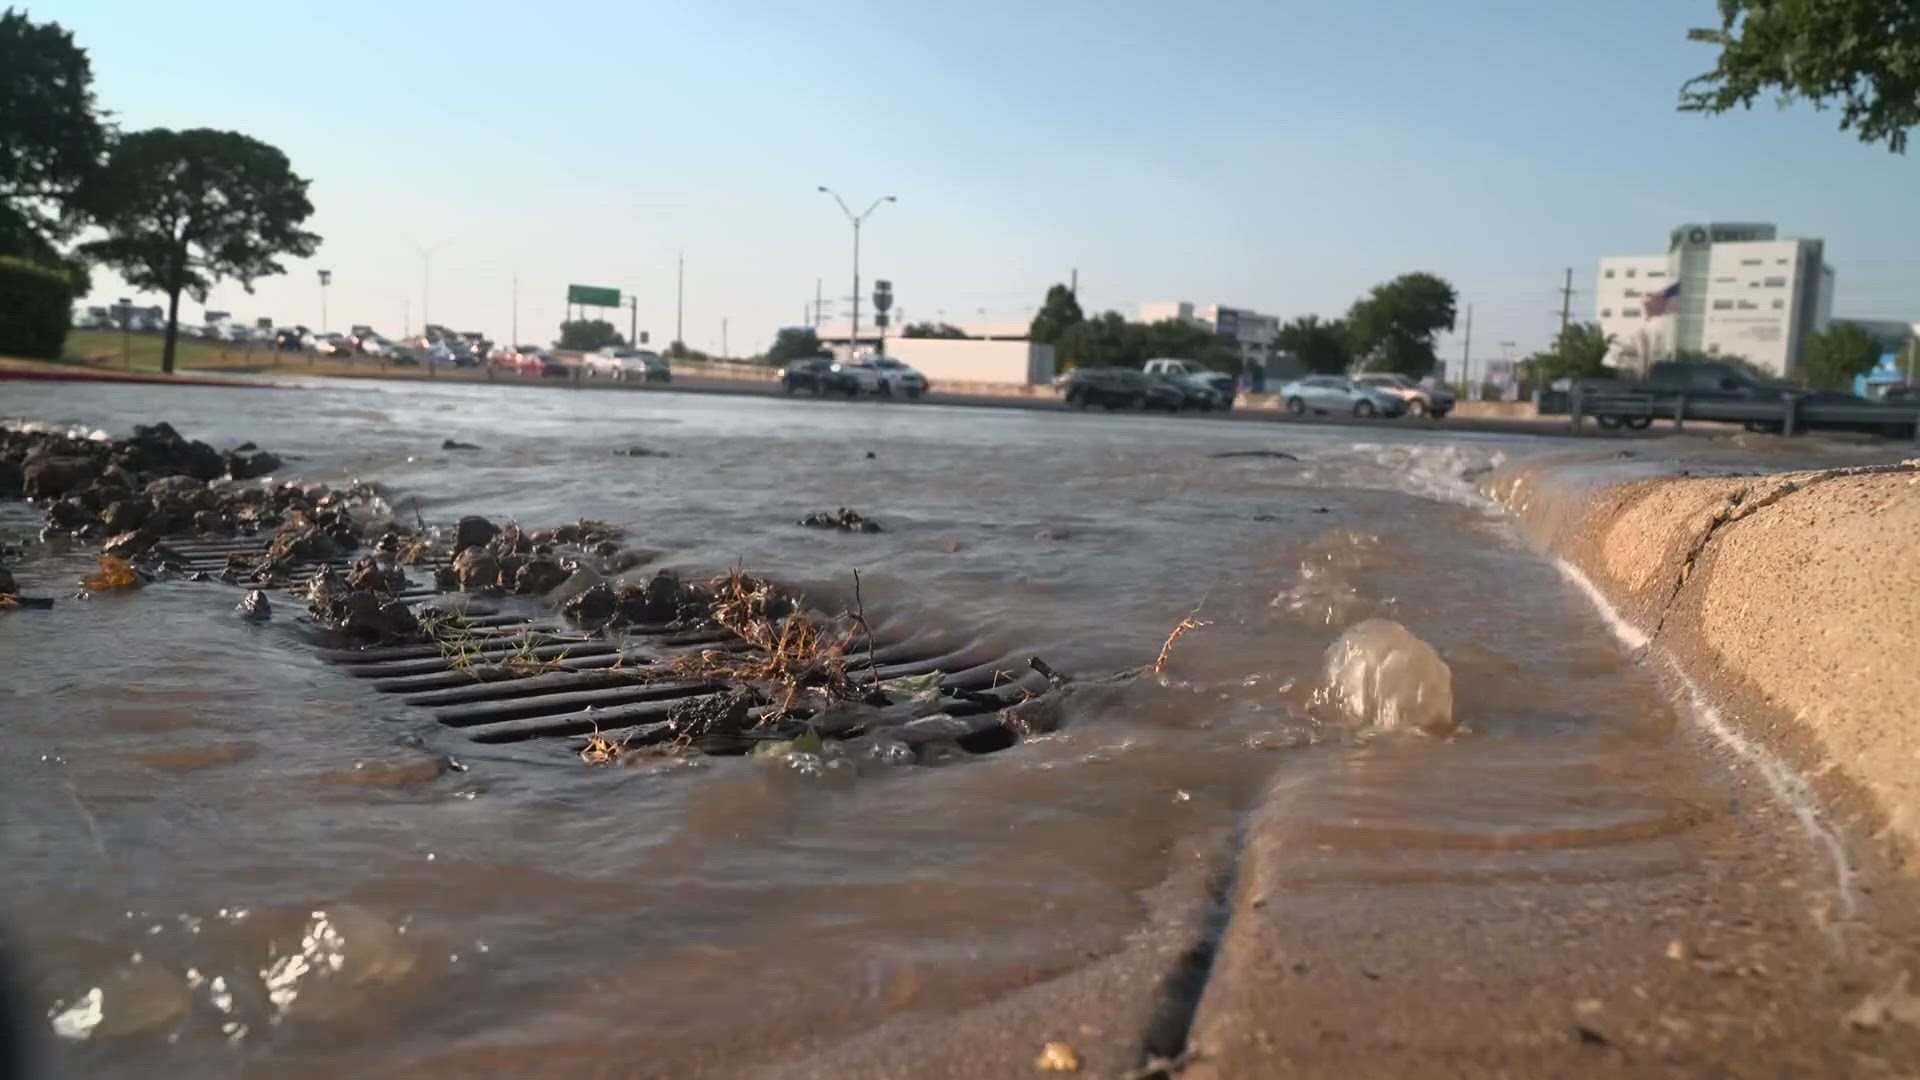 On Monday, a 12-inch cast-iron pipe laid in 1957 broke alongside I-35E near Inwood, which flooded a service road.